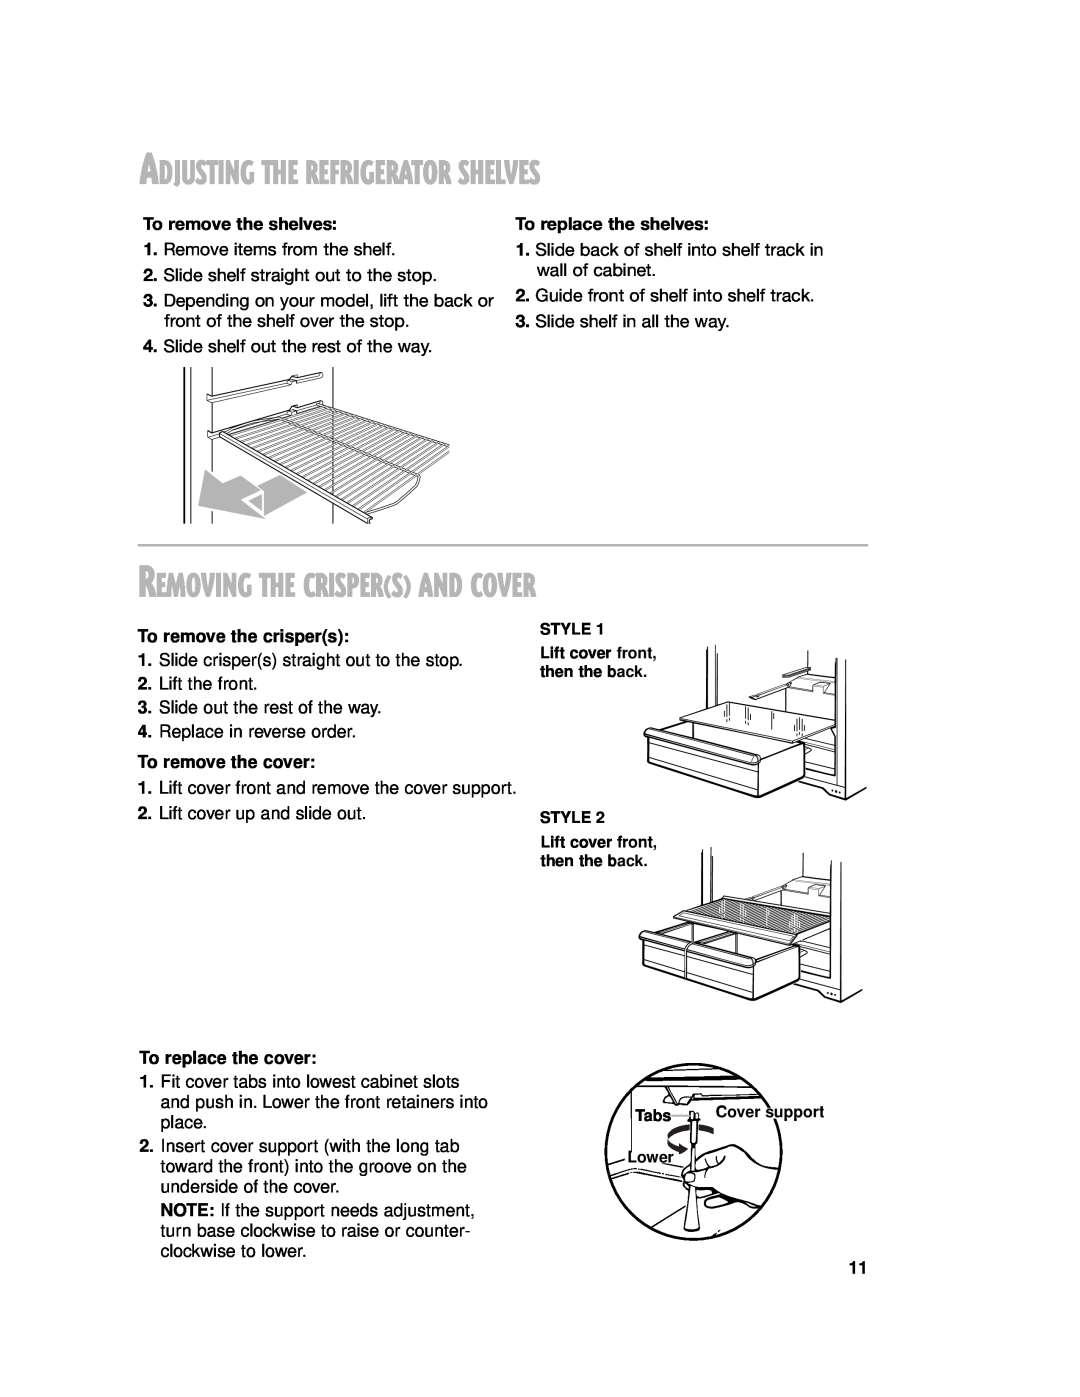 Whirlpool 2201959 manual To remove the shelves, To replace the shelves, Removing The Crispers And Cover 